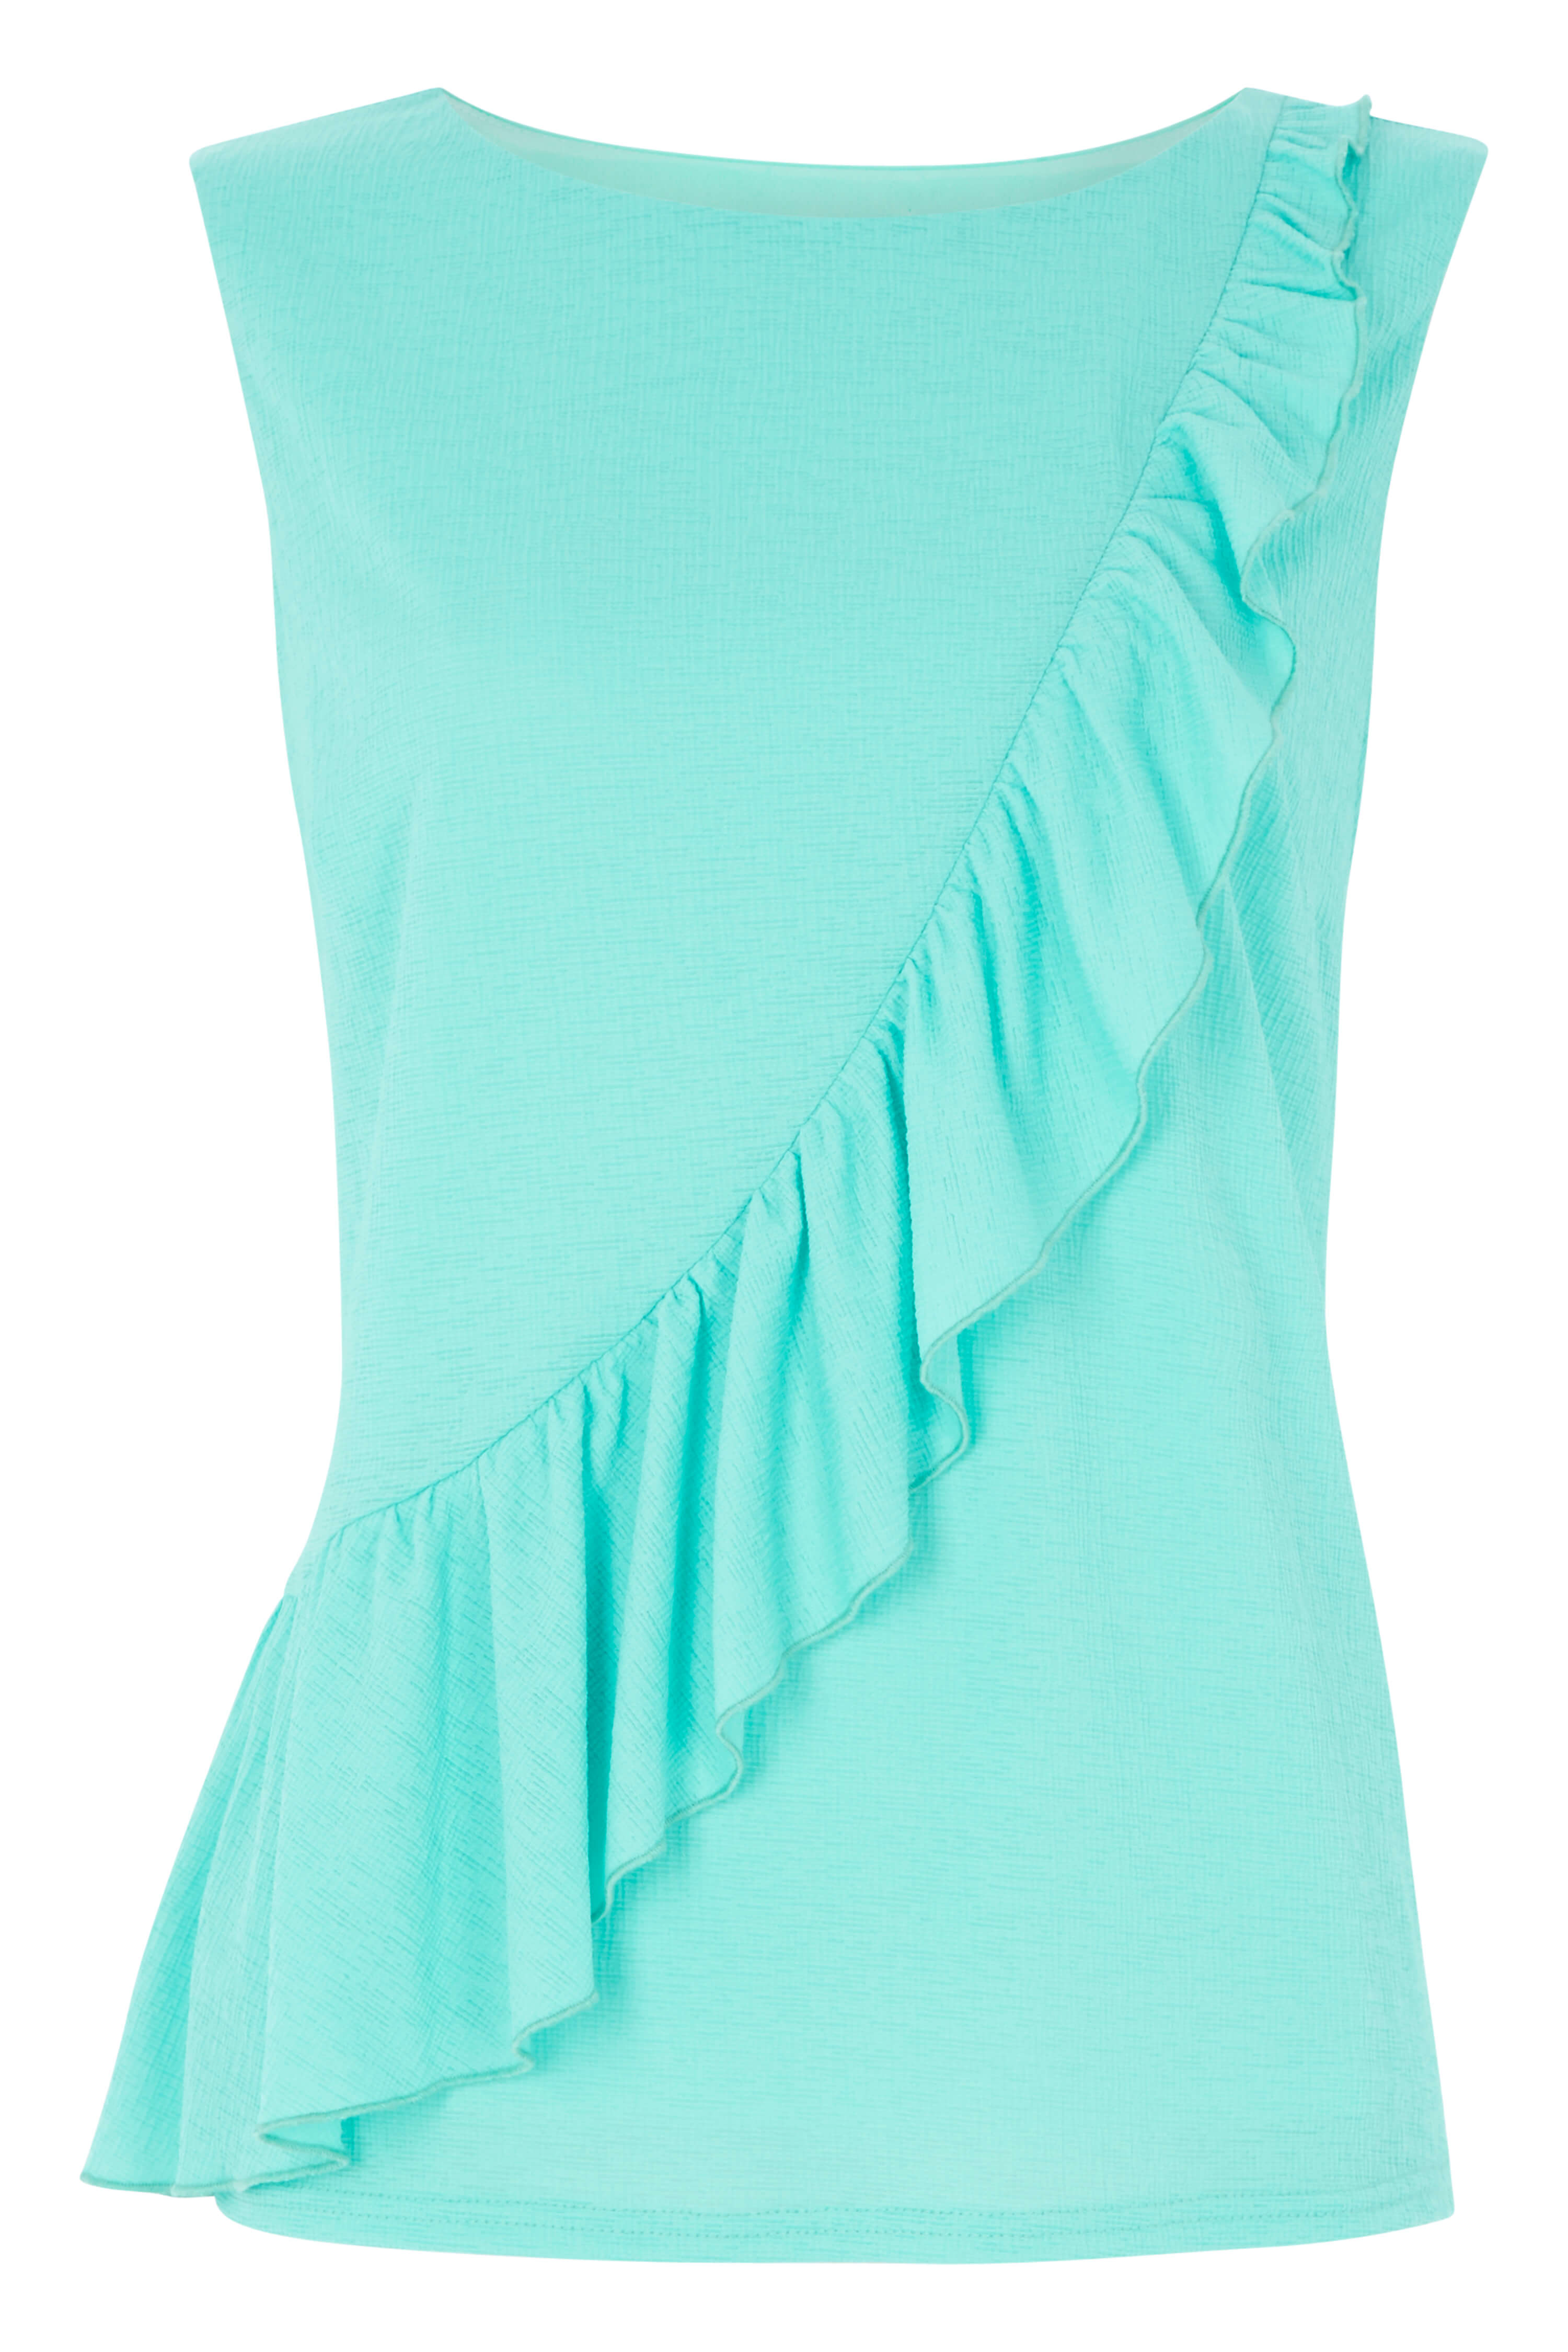 Turquoise Frill Textured Jersey Top, Image 2 of 2